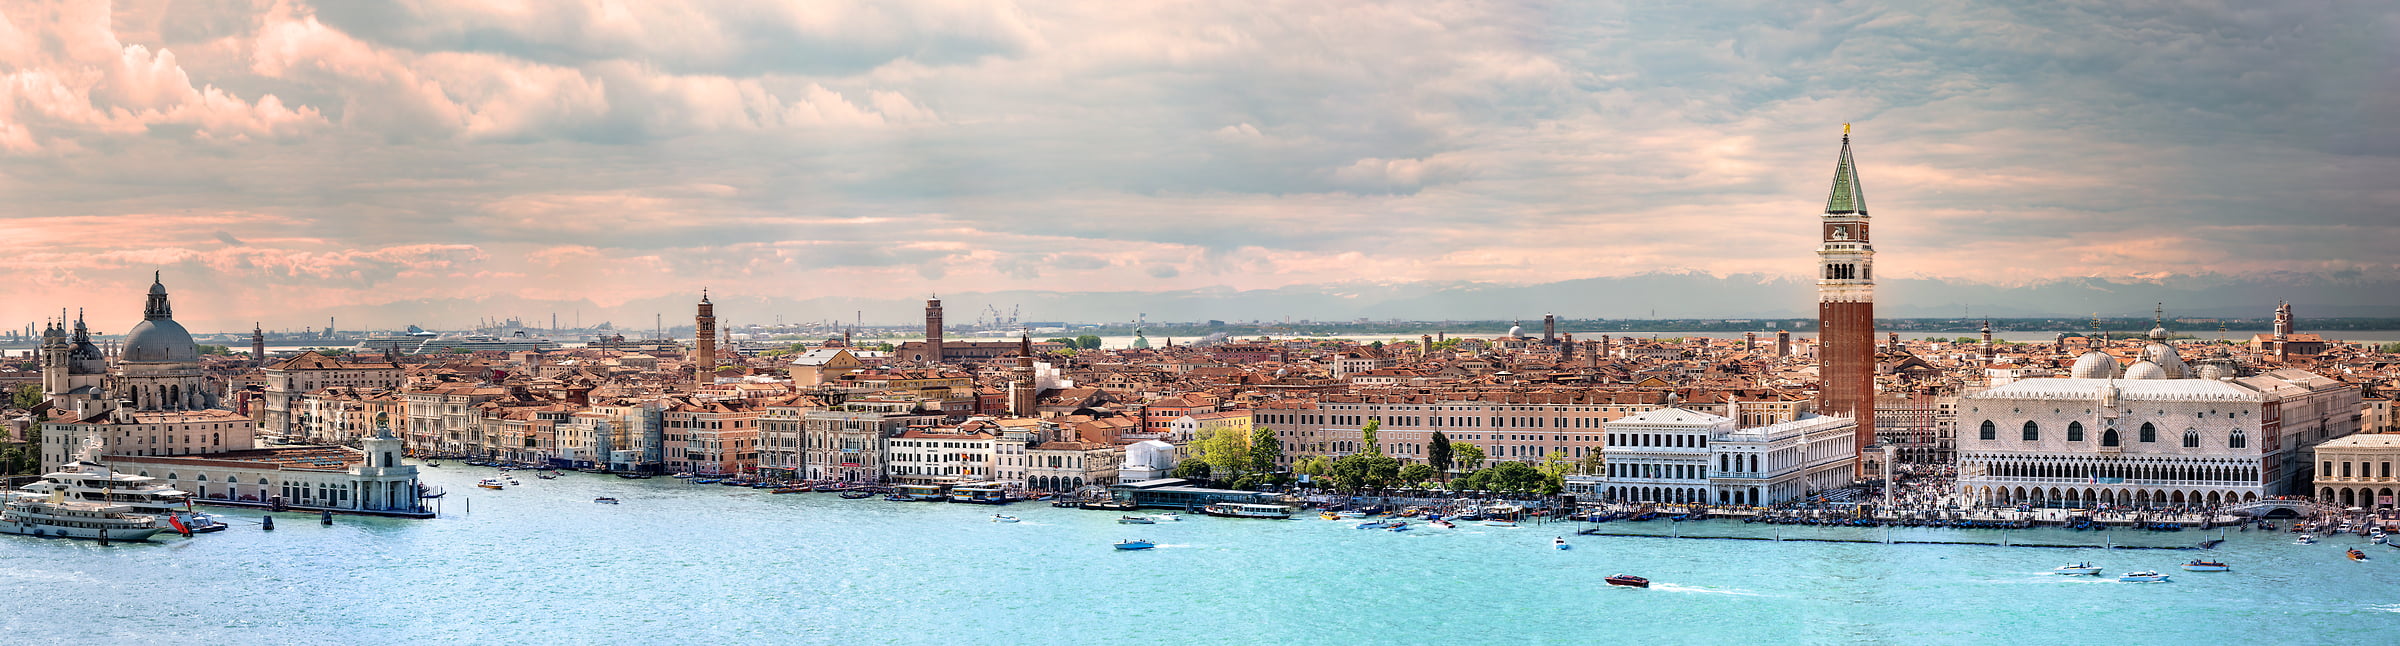 523 megapixels! A very high resolution, large-format VAST photo print of Venice, Italy with the Campanile di San Marco, canals, and boats; fine art cityscape photograph created by Justin Katz in Venice, Italy